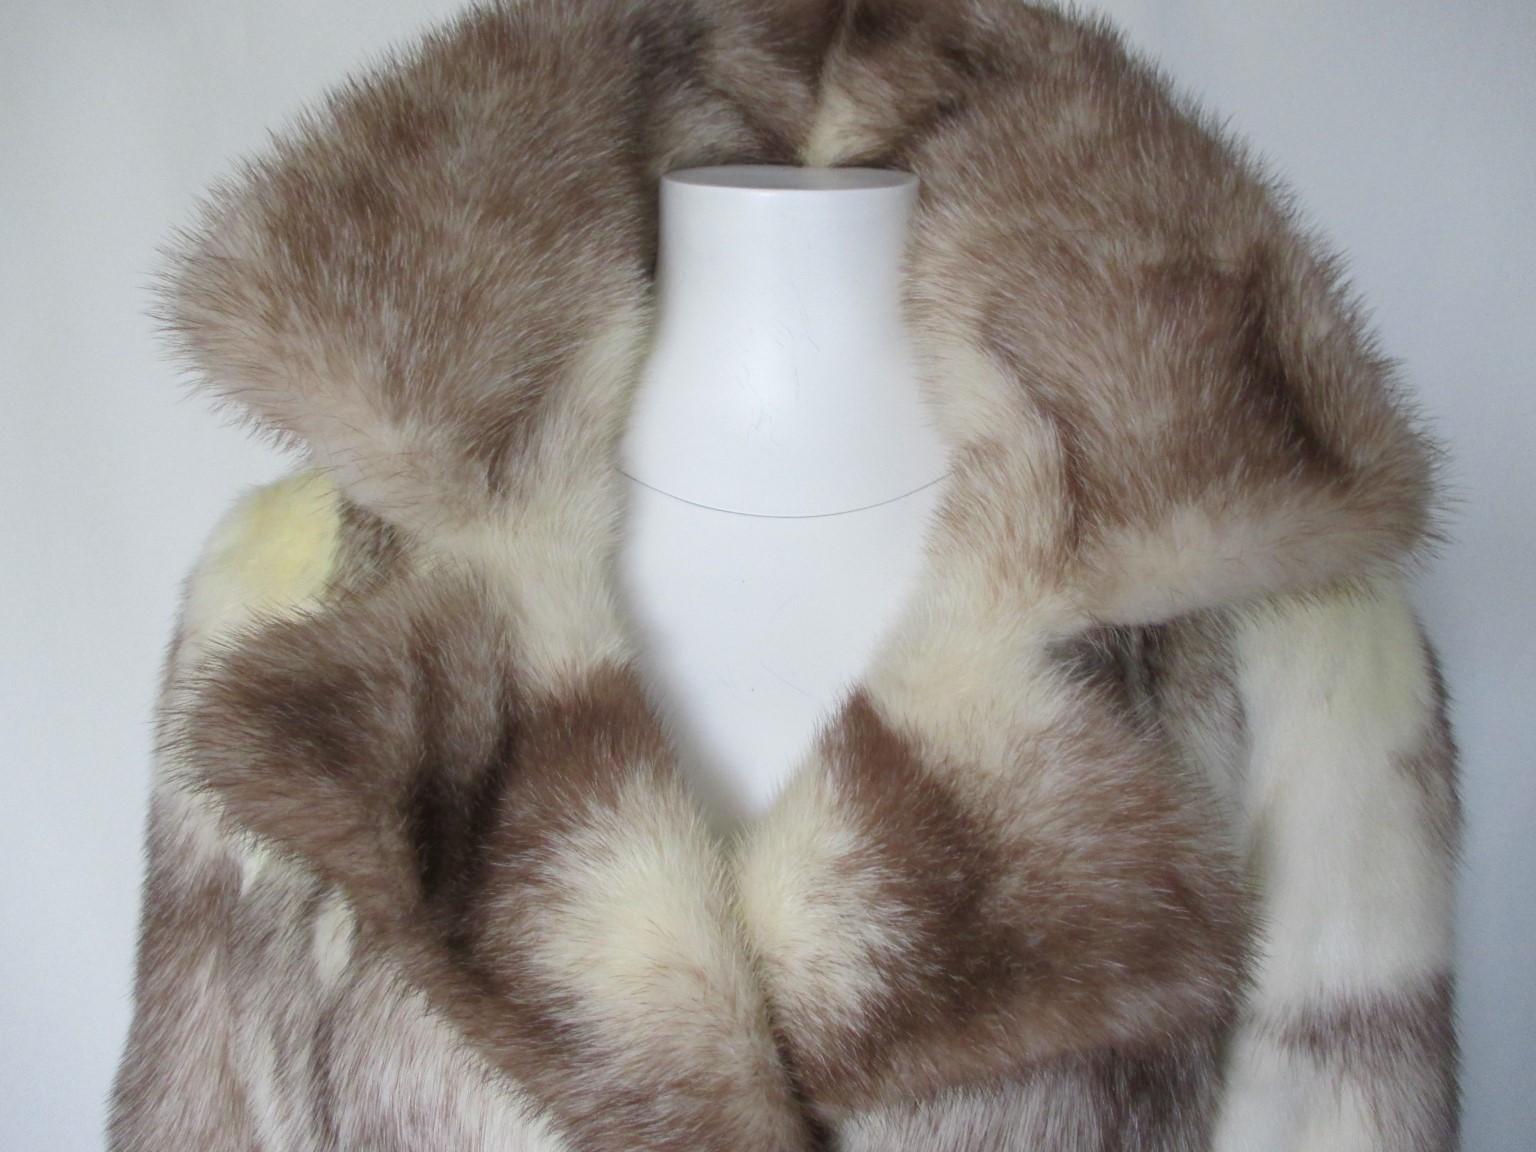 Stunning vintage mink fur jacket/coat is very rare to find in this color.

We offer more luxury fur items, view our fronstore.

Details:
Made of creme/brown cross/kohinoor mink fur with brown suede leather details.
The coat has 2 closing hooks and 2